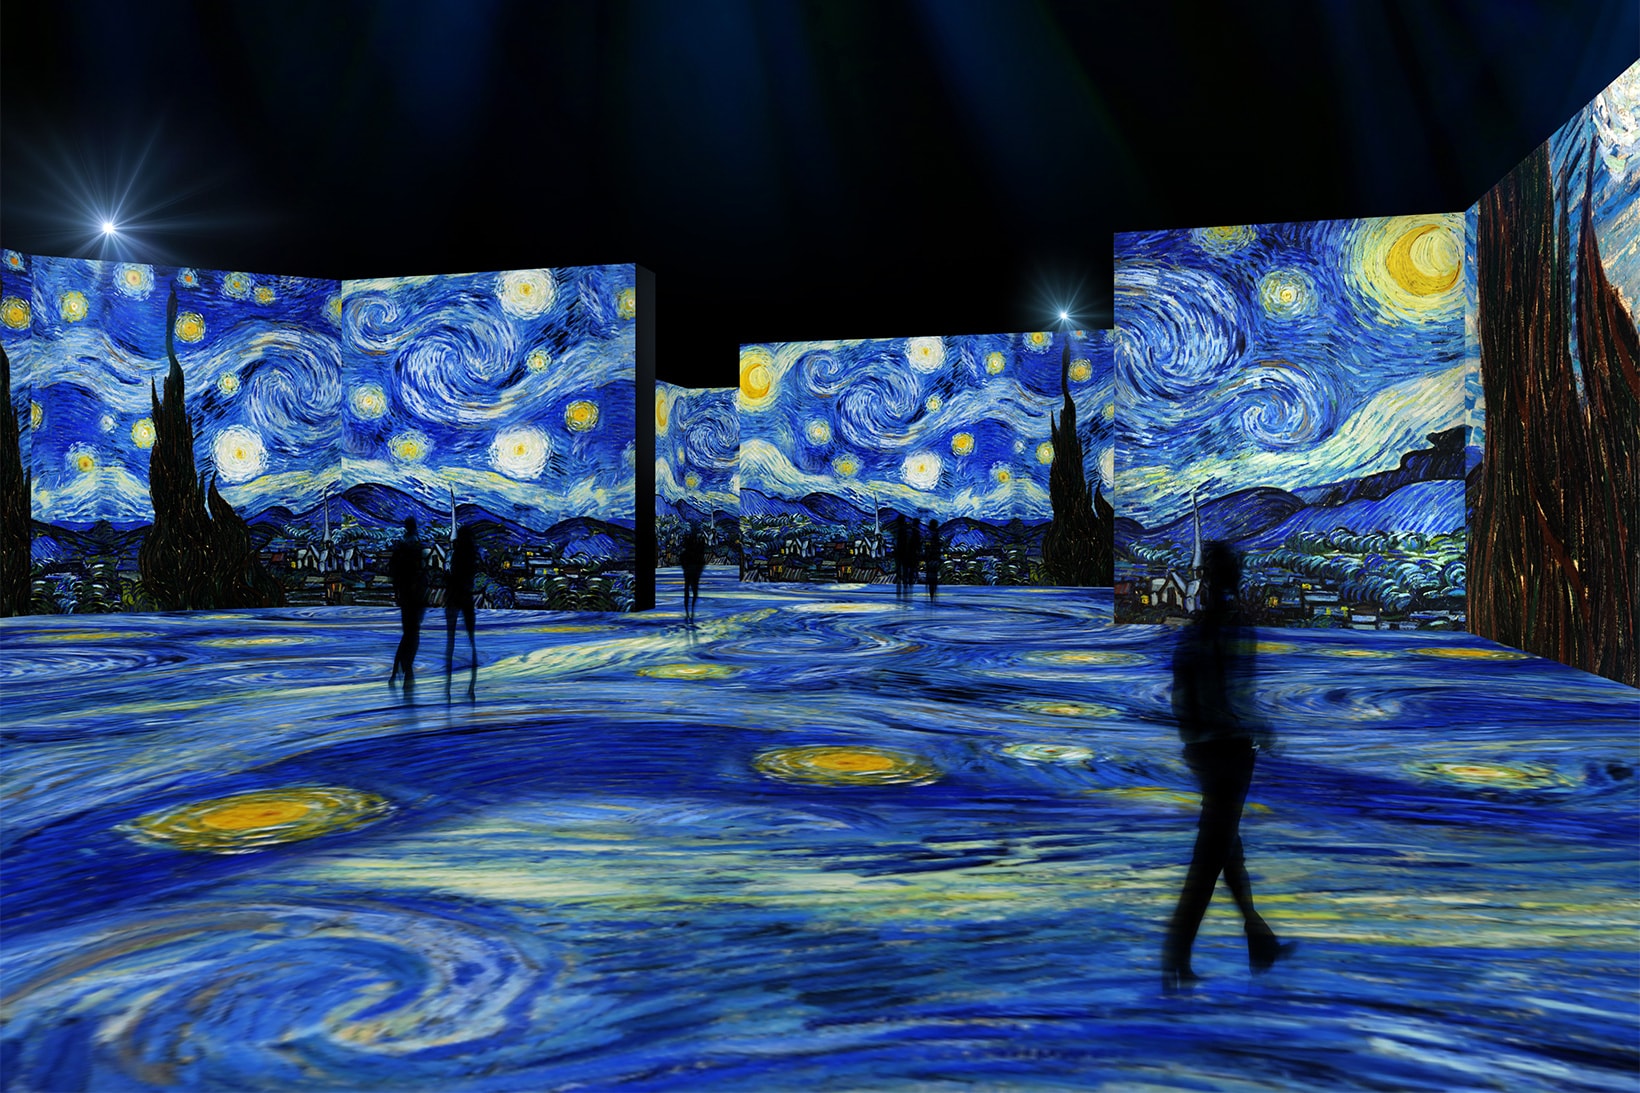 vincent van gogh the lume exhibition opening 2021 indianapolis museum of art newfields starry night sunflowers location date